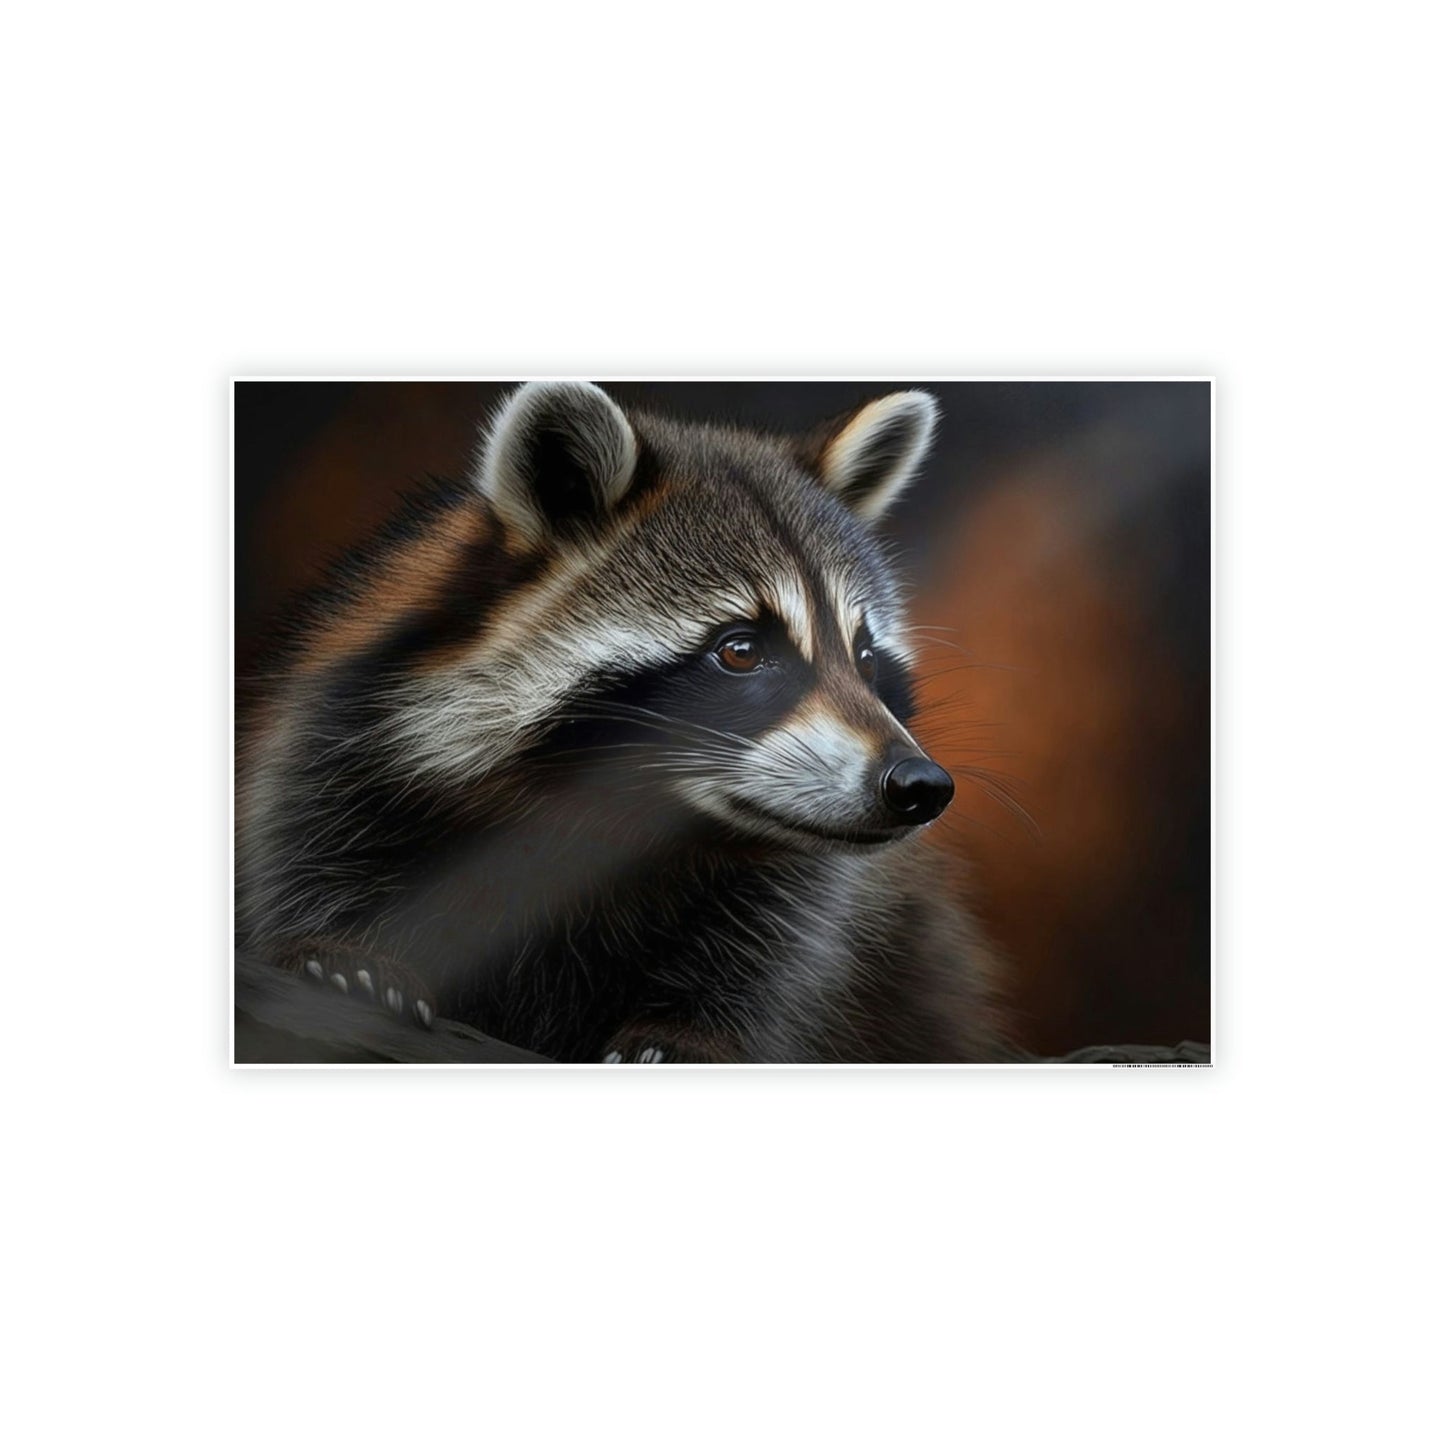 Woodland Bandits: Artistic Print on Canvas and Framed Poster of Sly Raccoon